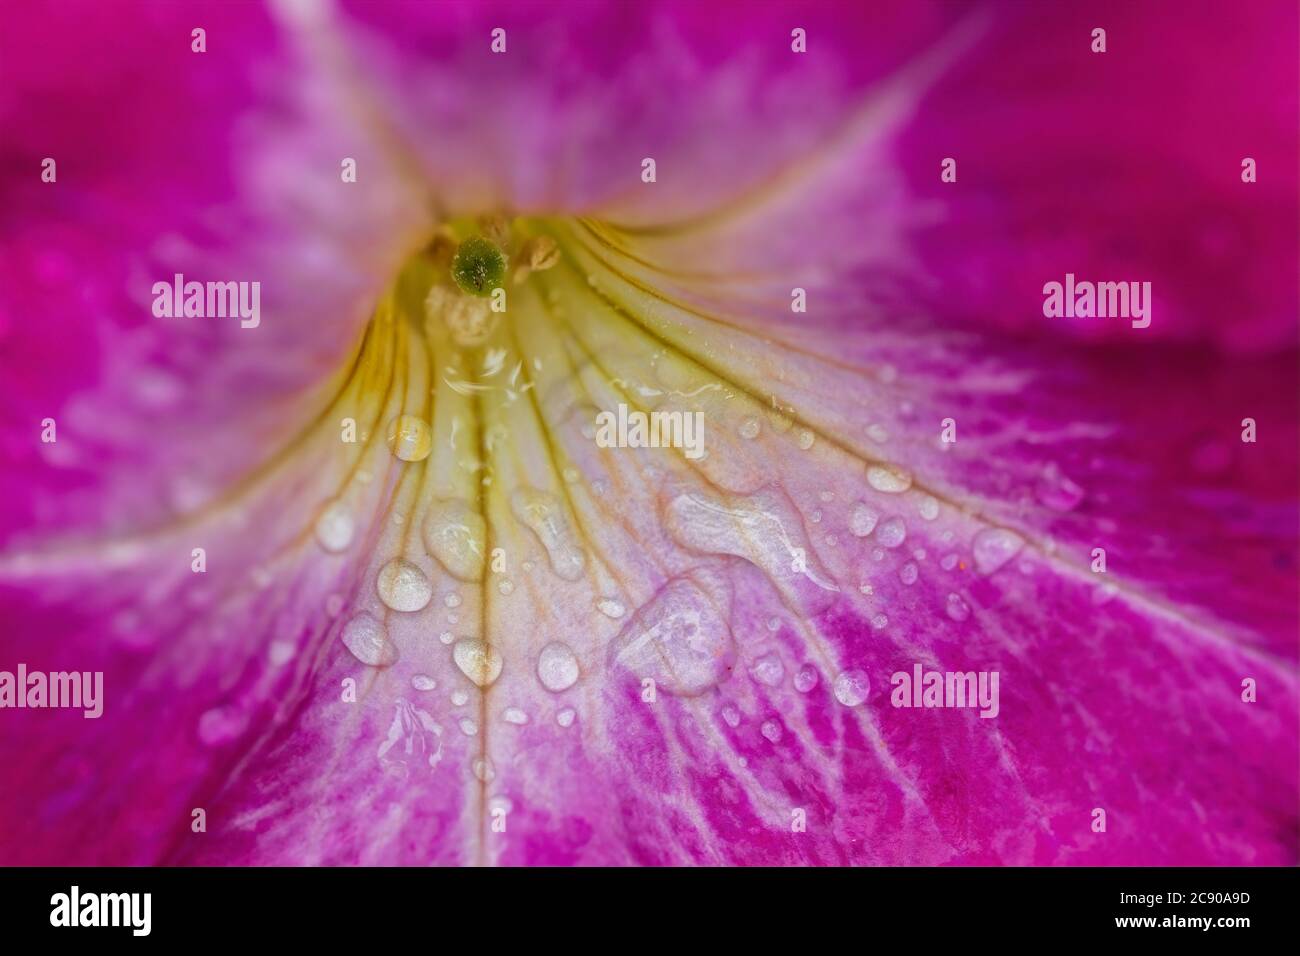 Macro image on a flower with raindrops. Stock Photo